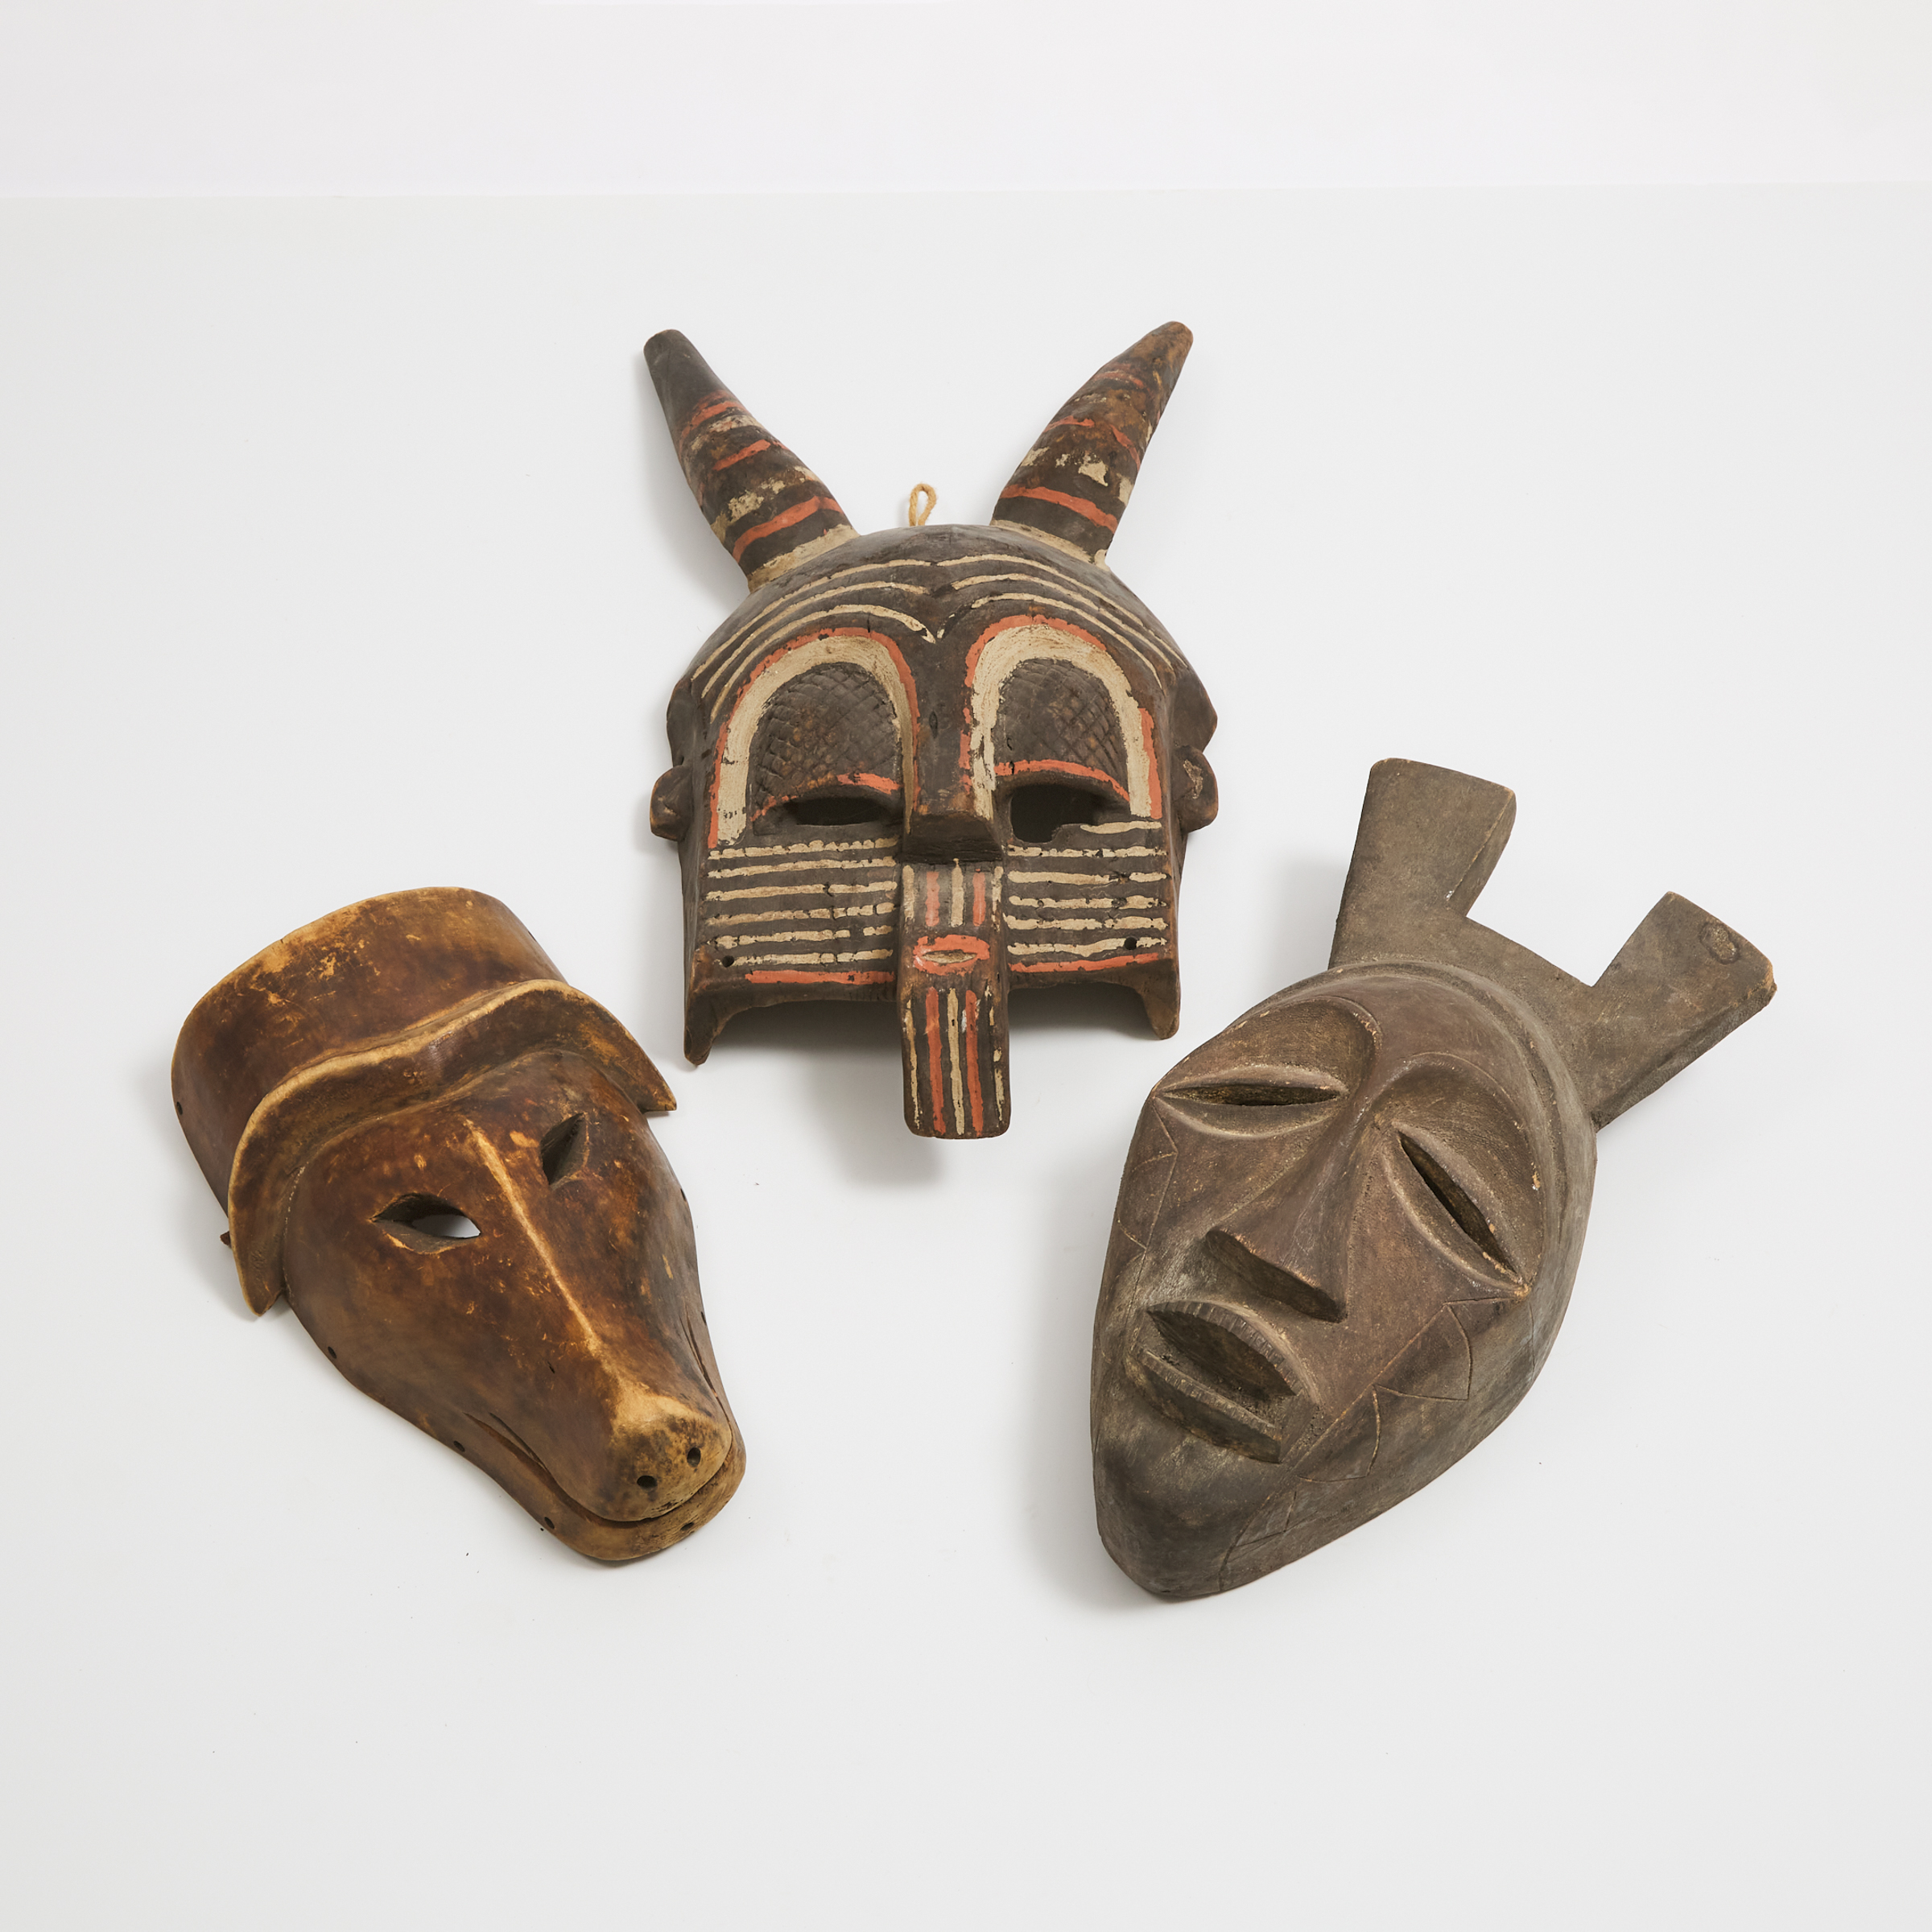 Group of Three Unidentified African Masks, 20th century